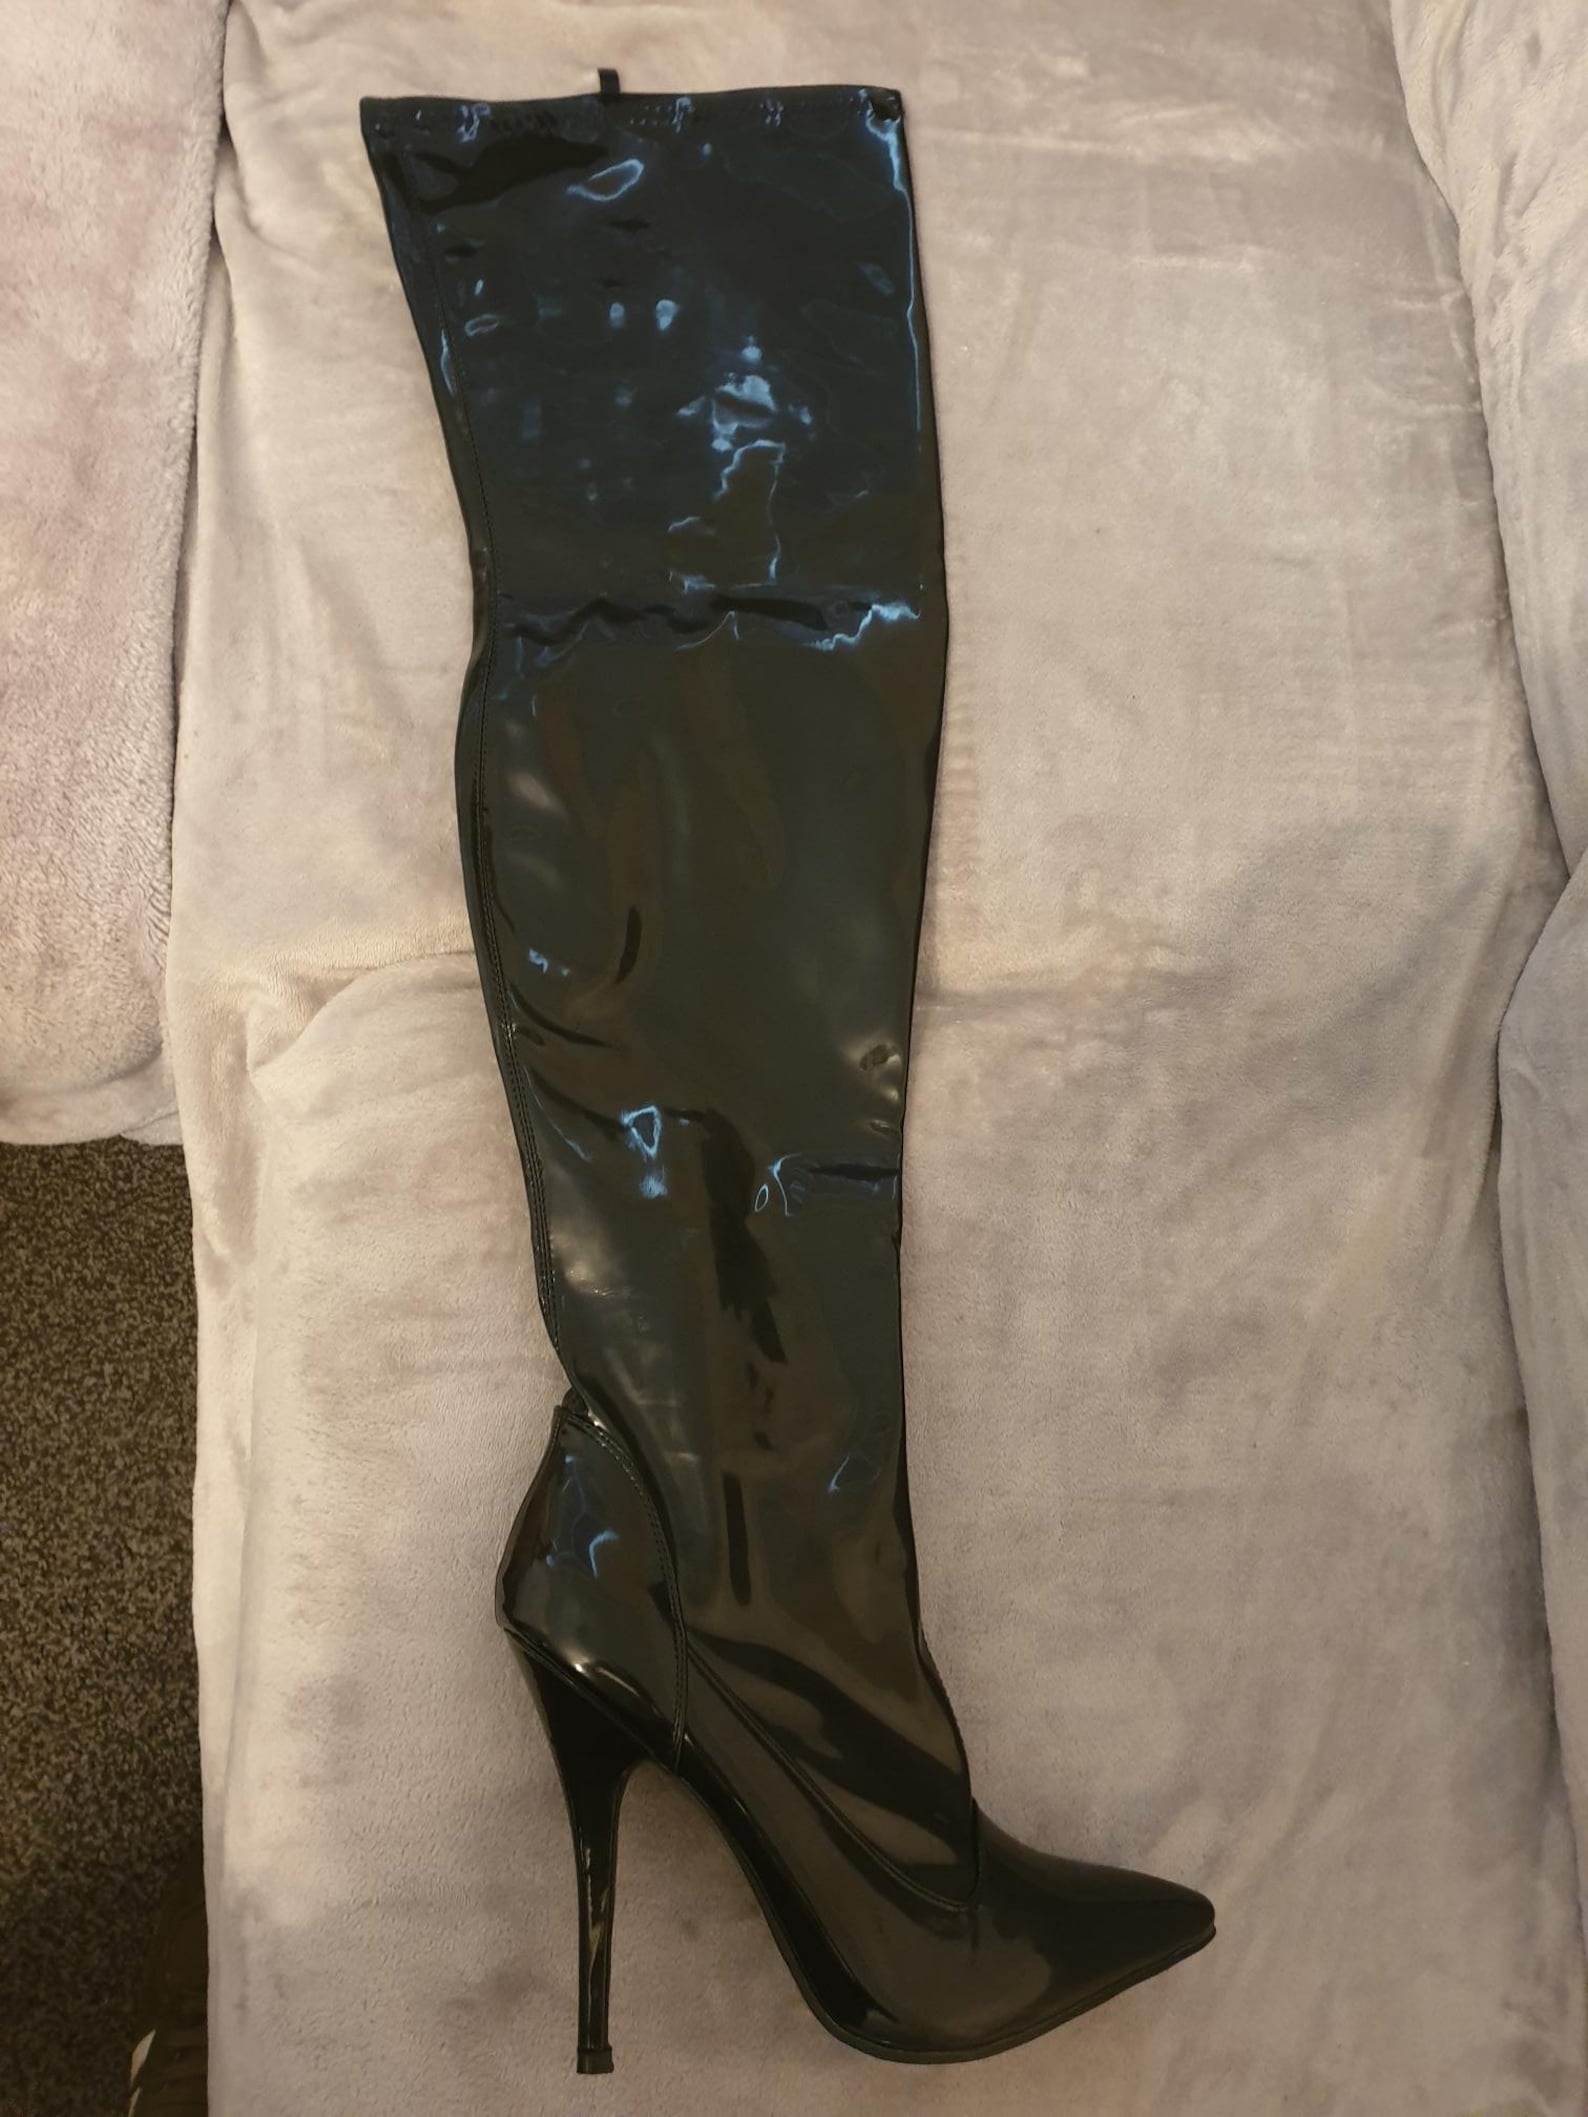 Size 11 Mens Sexy Thigh High Boots Sissy CD Fetish - Etsy